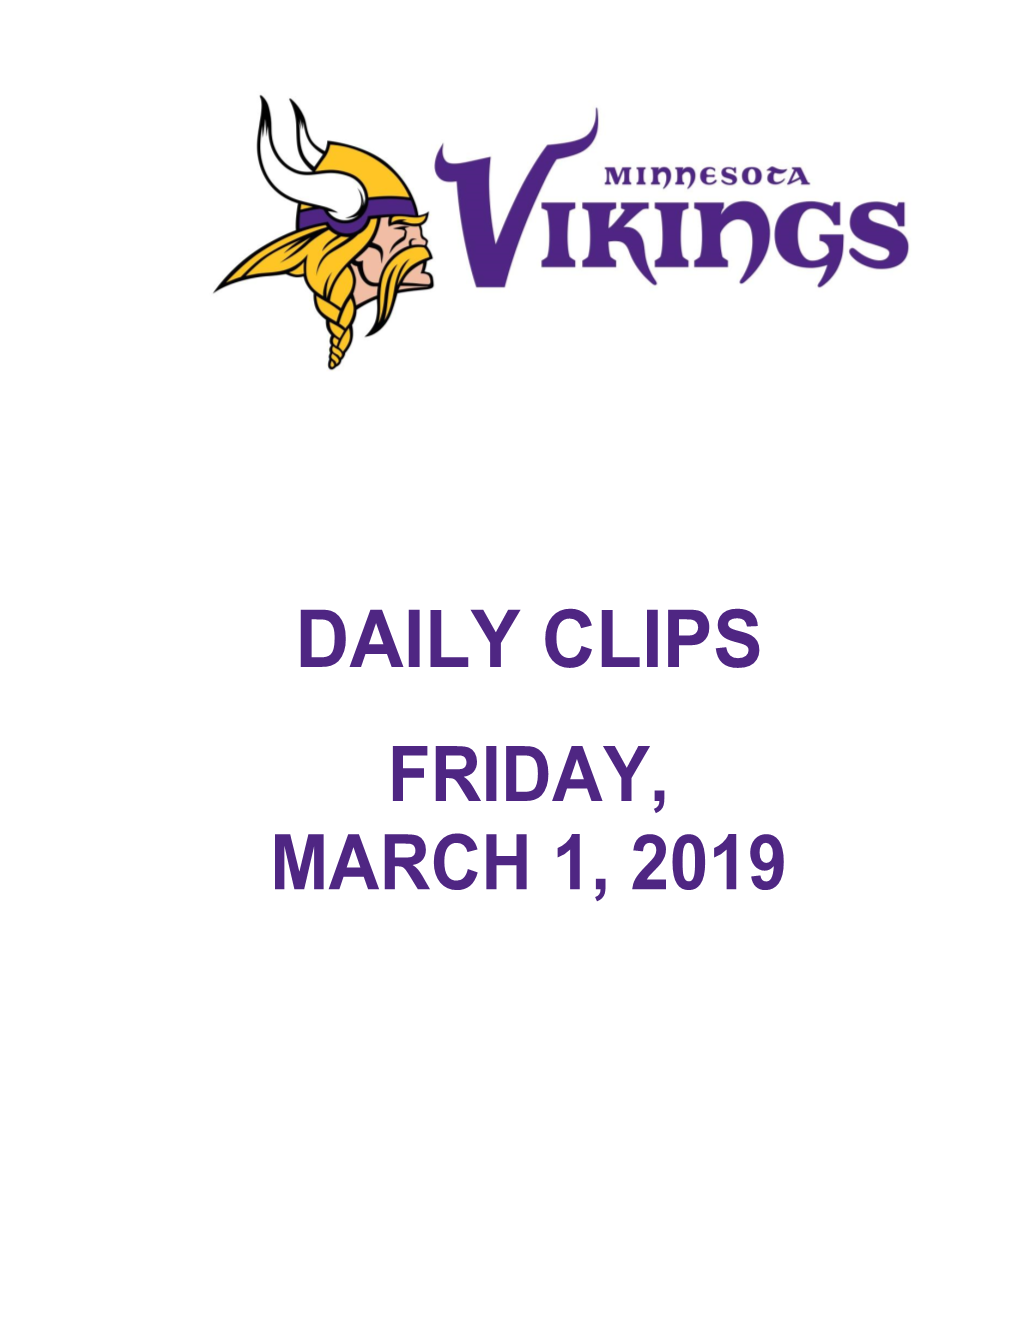 Daily Clips Friday, March 1, 2019